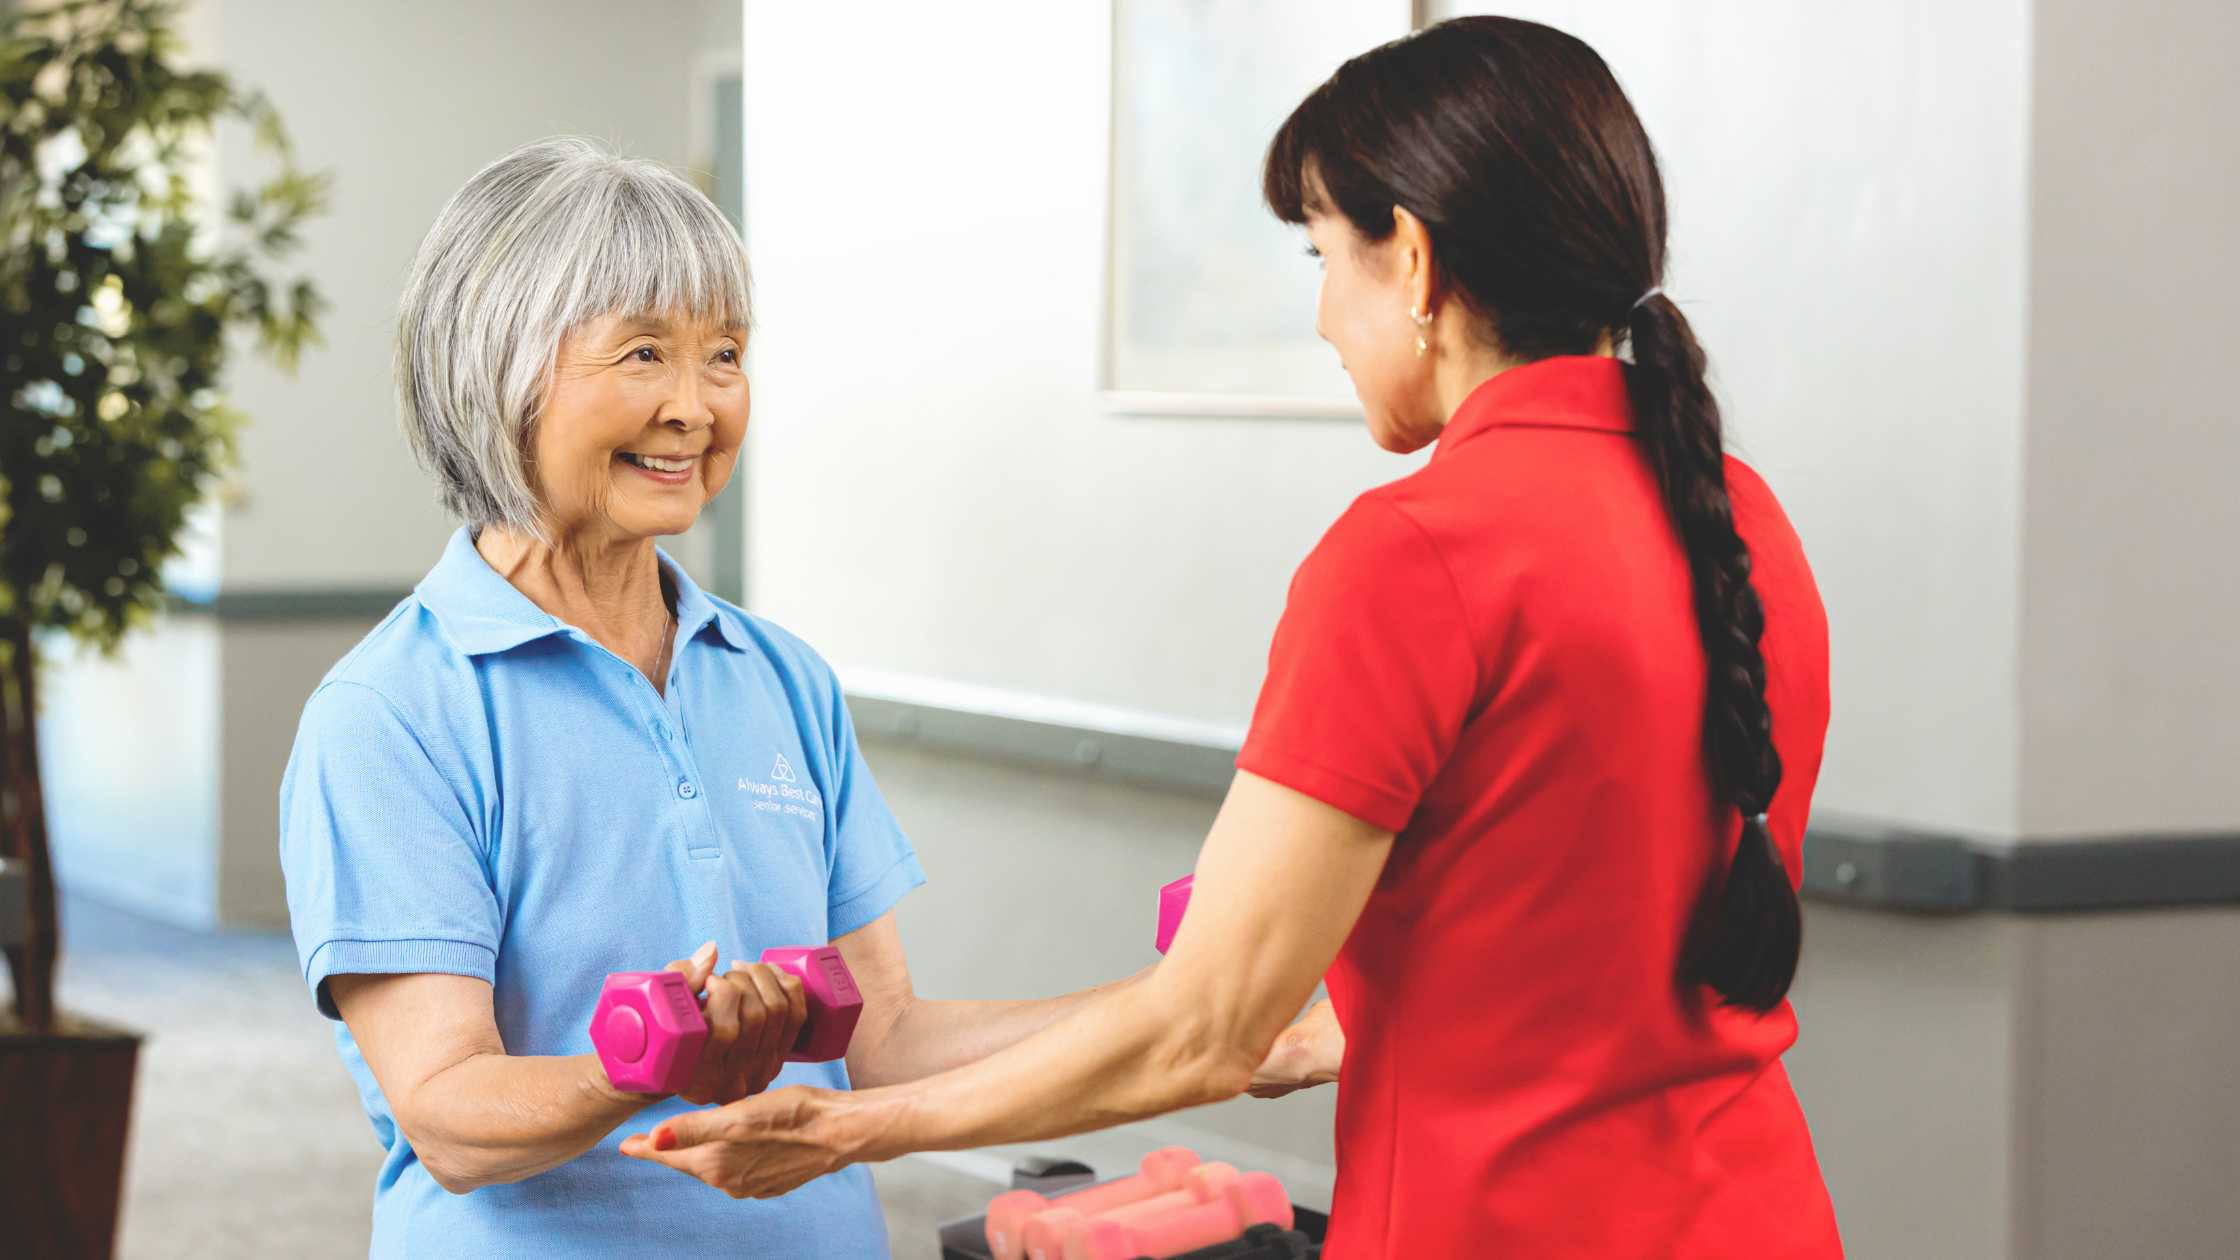 From Loss to Strength: How Physical Therapy Can Help Stroke Patients Regain Mobility